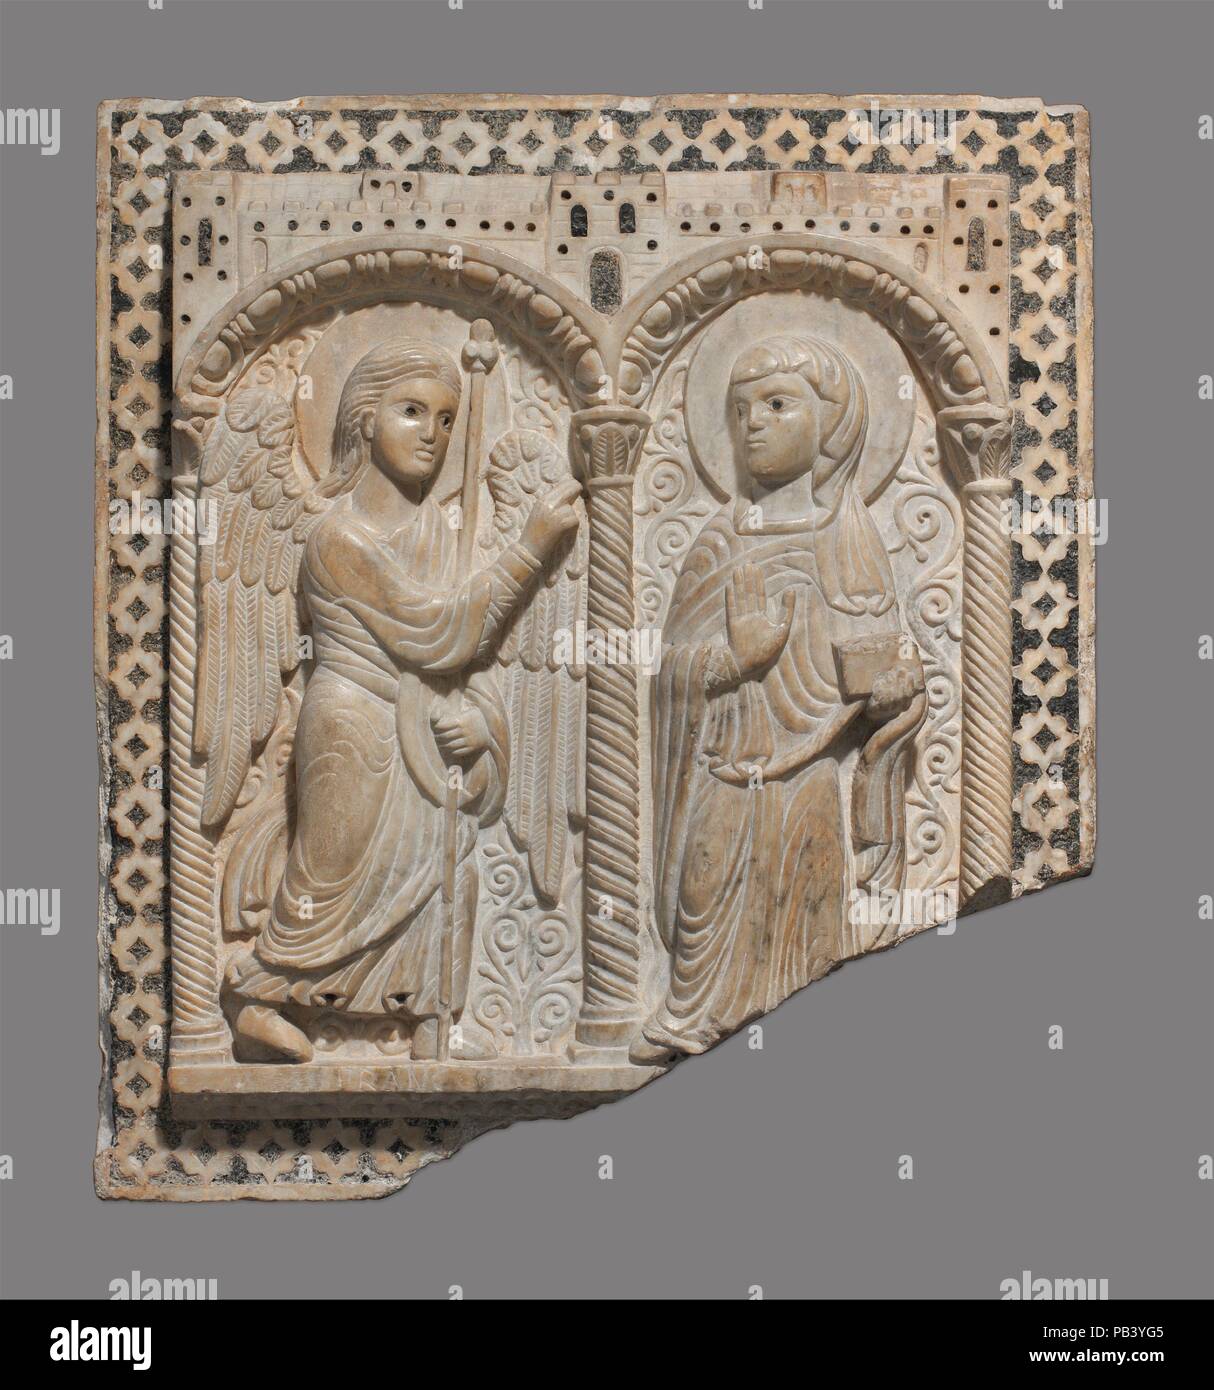 Relief with the Annunciation. Culture: Italian. Dimensions: 26 1/2 x 24 x 4 3/4 in. (67.3 x 61 x 12.1 cm). Date: ca. 1180-1200.  This relief is one of seven panels from a pulpit in the church of San Piero Scheraggio in Florence, which was dismantled sometime between 1410 and 1755. In medieval Italy, pulpits were used for the reading of the Gospels and the Epistles and were located on the south side of the choir. Here, the Virgin and the archangel Gabriel stand in separate niches under a city wall. The fluid treatment of the drapery, the form of the figures, and the combination of narrative rel Stock Photo